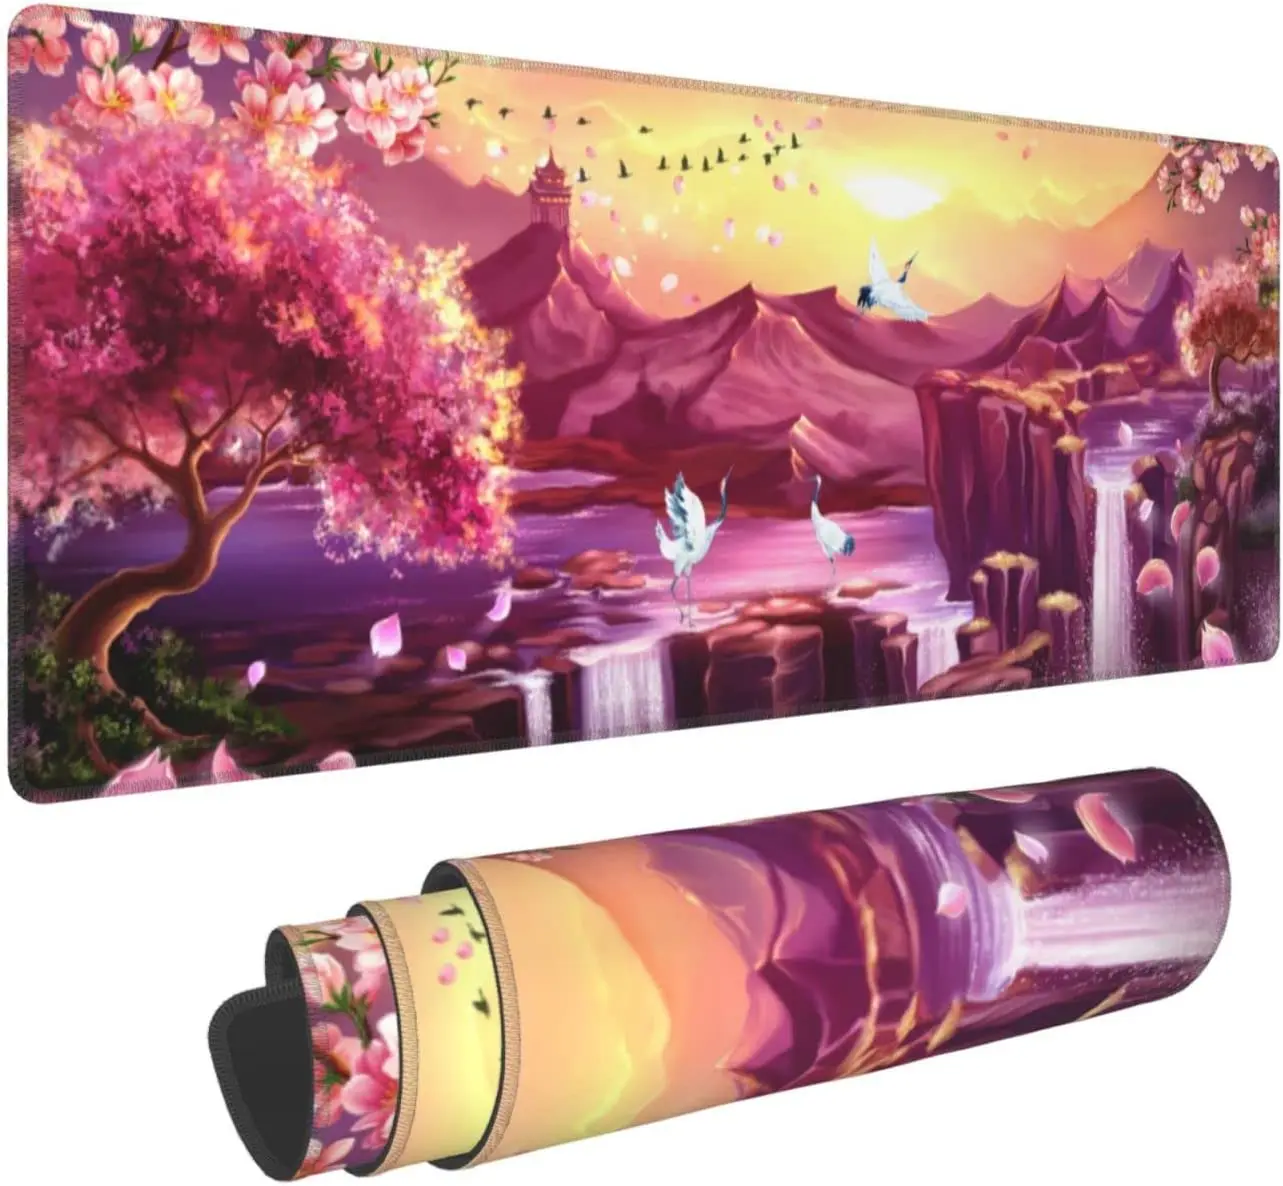 

Japanese Sunset Mouse Pad XL, Extended Mousepad Desk Pad Long Nonslip Rubber Mice Mats Stitched Edges Playmat 31.5x11.8 Inch